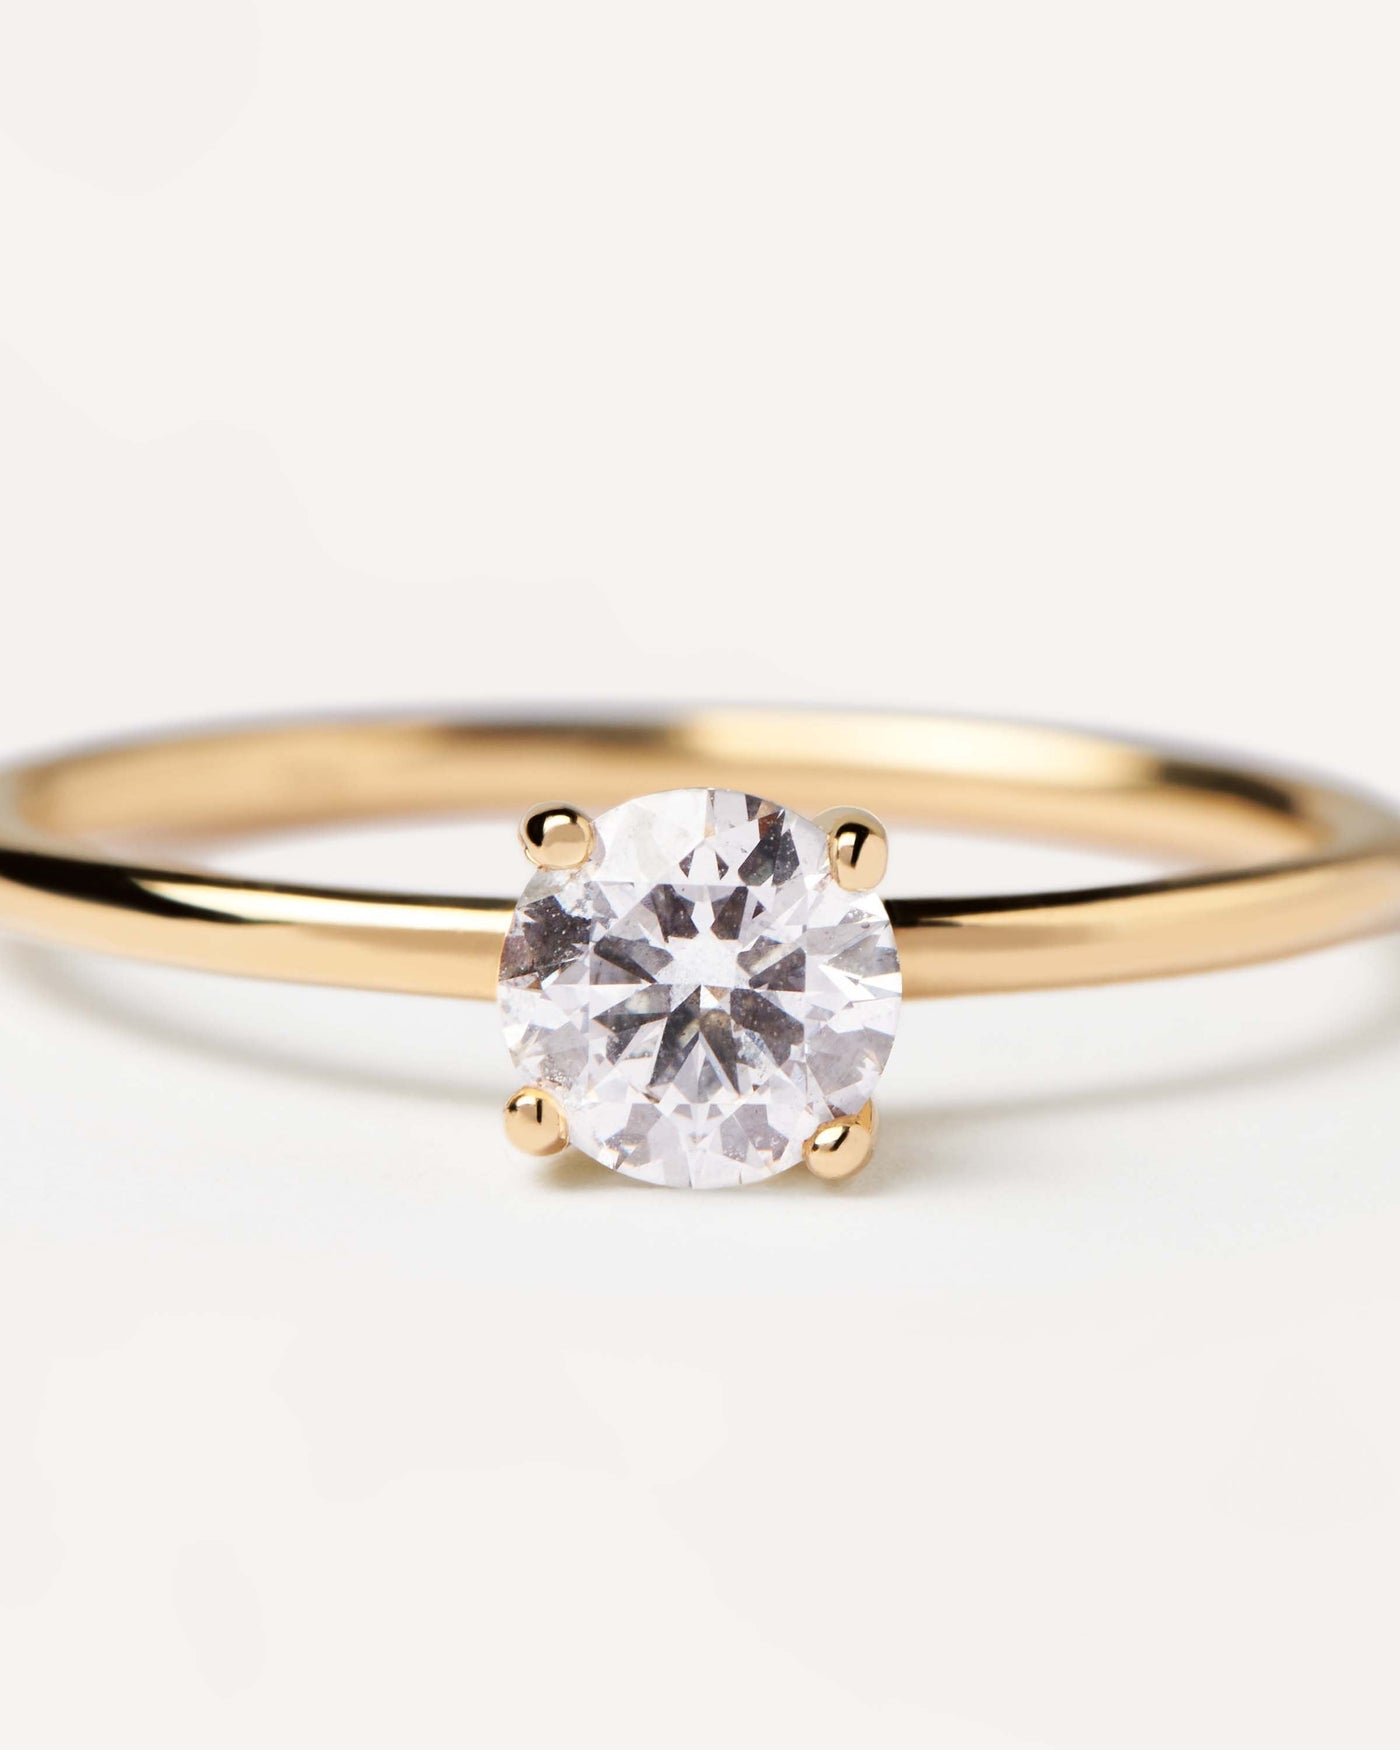 2023 Selection | Diamonds and gold Solitaire Supreme Ring. Solid yellow gold Solitary ring set with a great 0.50 carat diamond. Get the latest arrival from PDPAOLA. Place your order safely and get this Best Seller. Free Shipping.